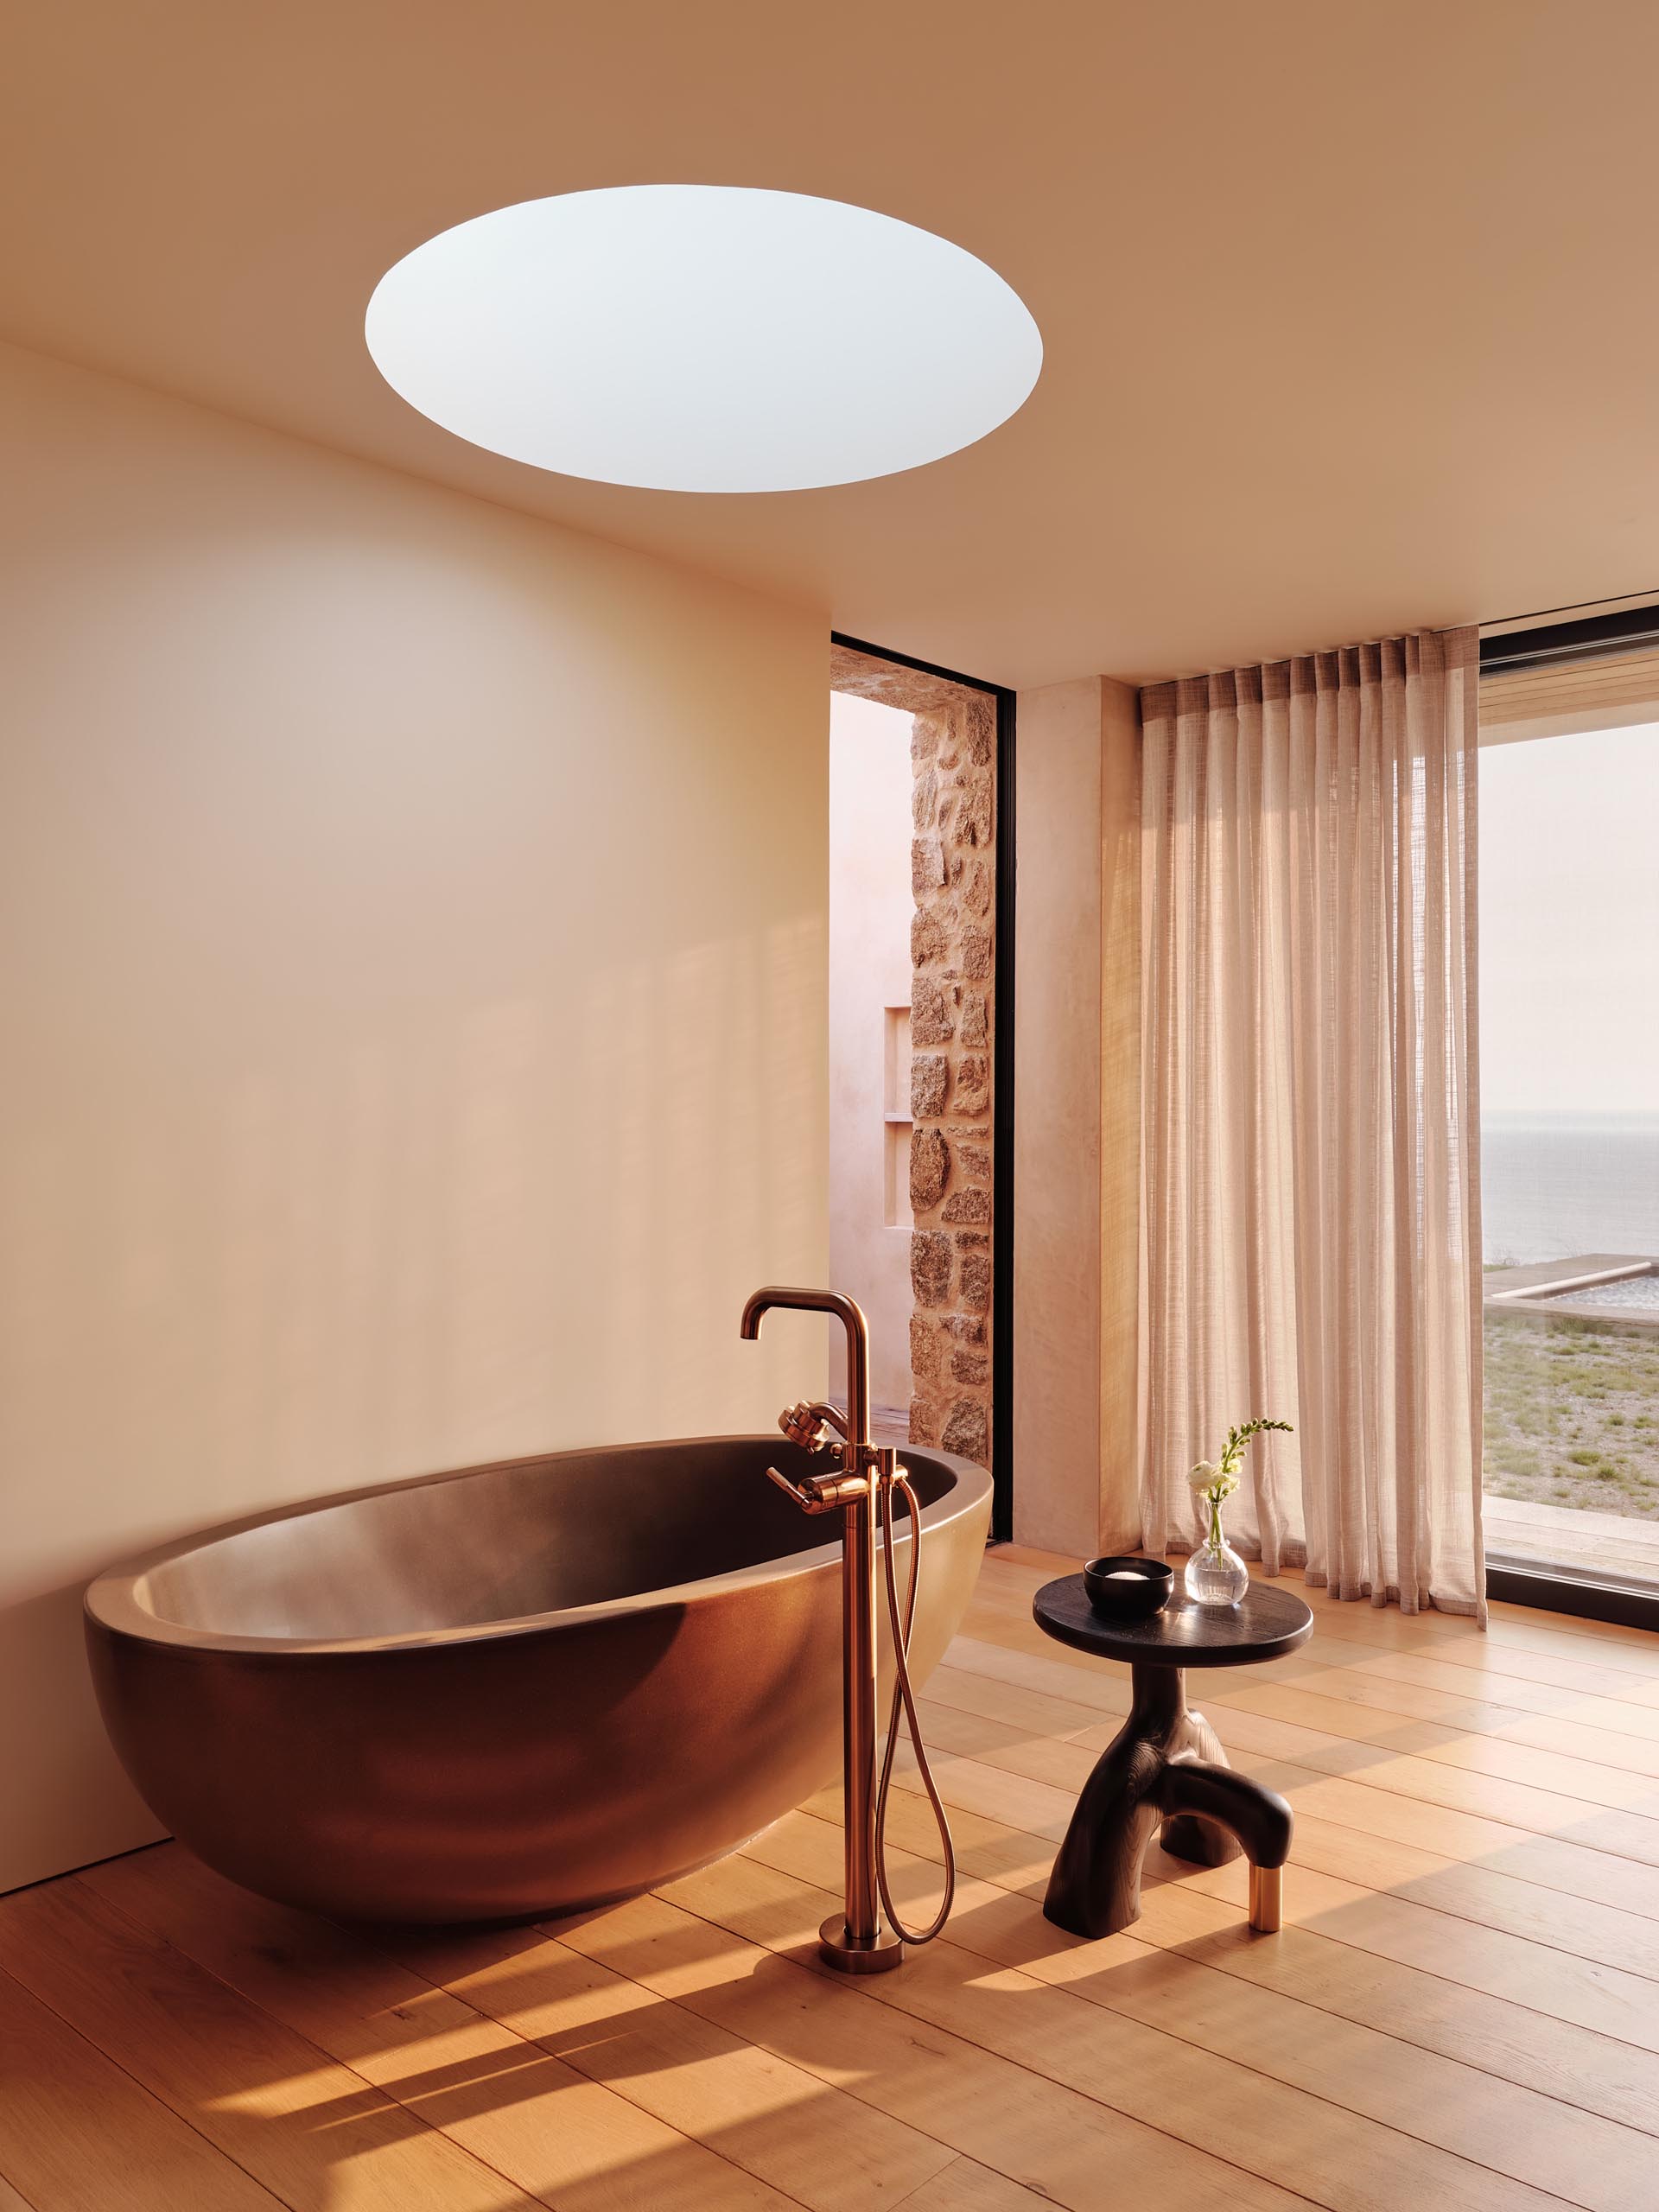 This modern en-suite bathroom includes a freestanding bathtub, a wood floor, and a skylight.